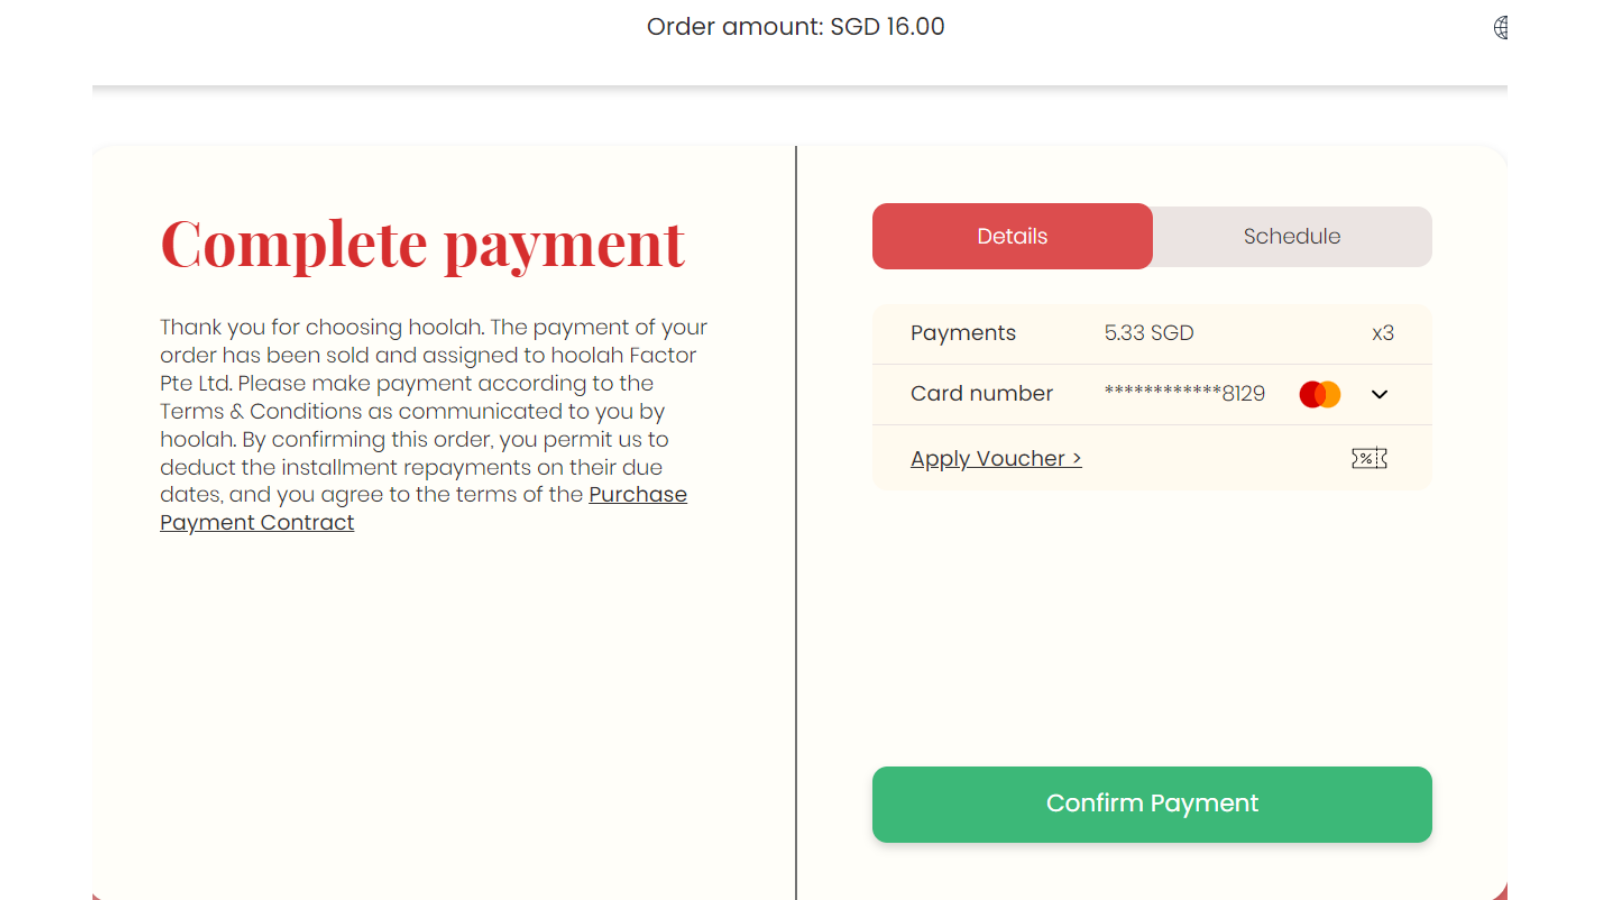 Confirm payment 